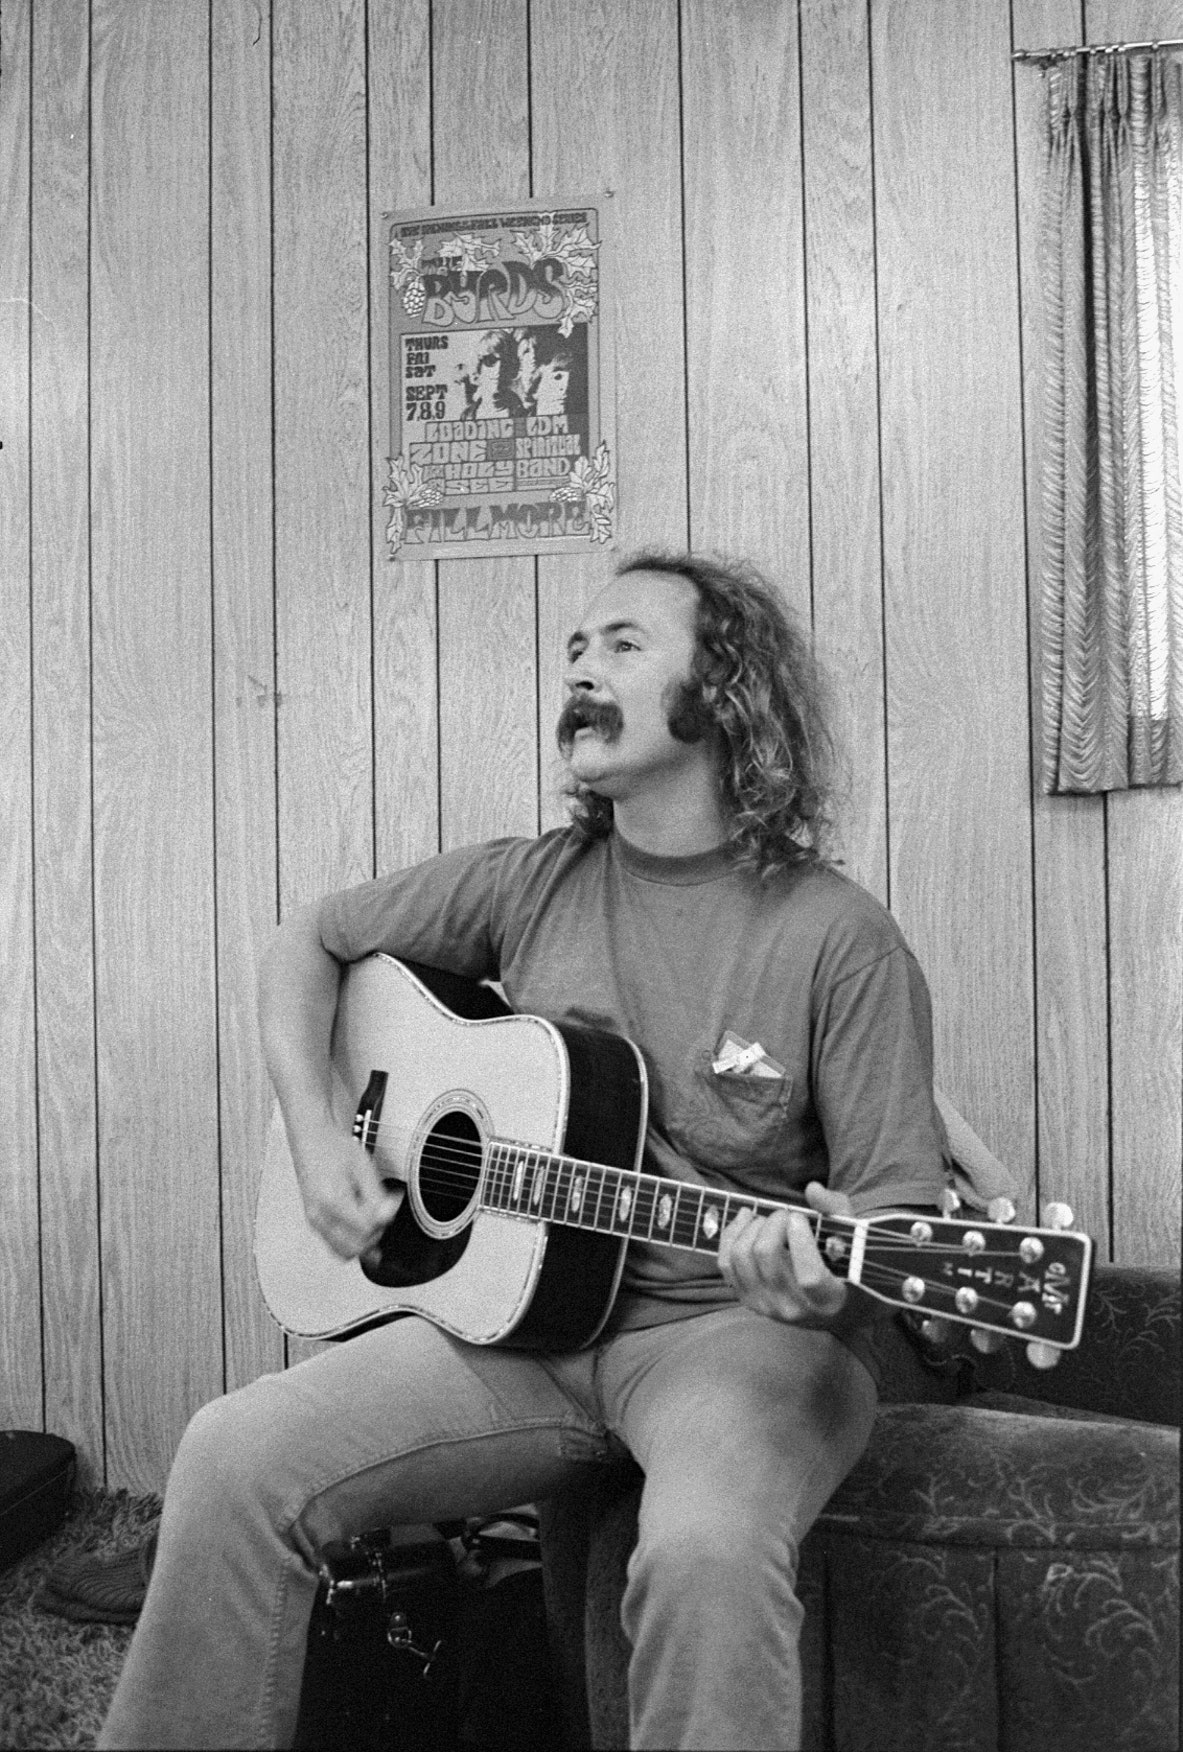 David Crosby Celebrates His Ornery Self in the Documentary “Remember My Name”. The New Yorker